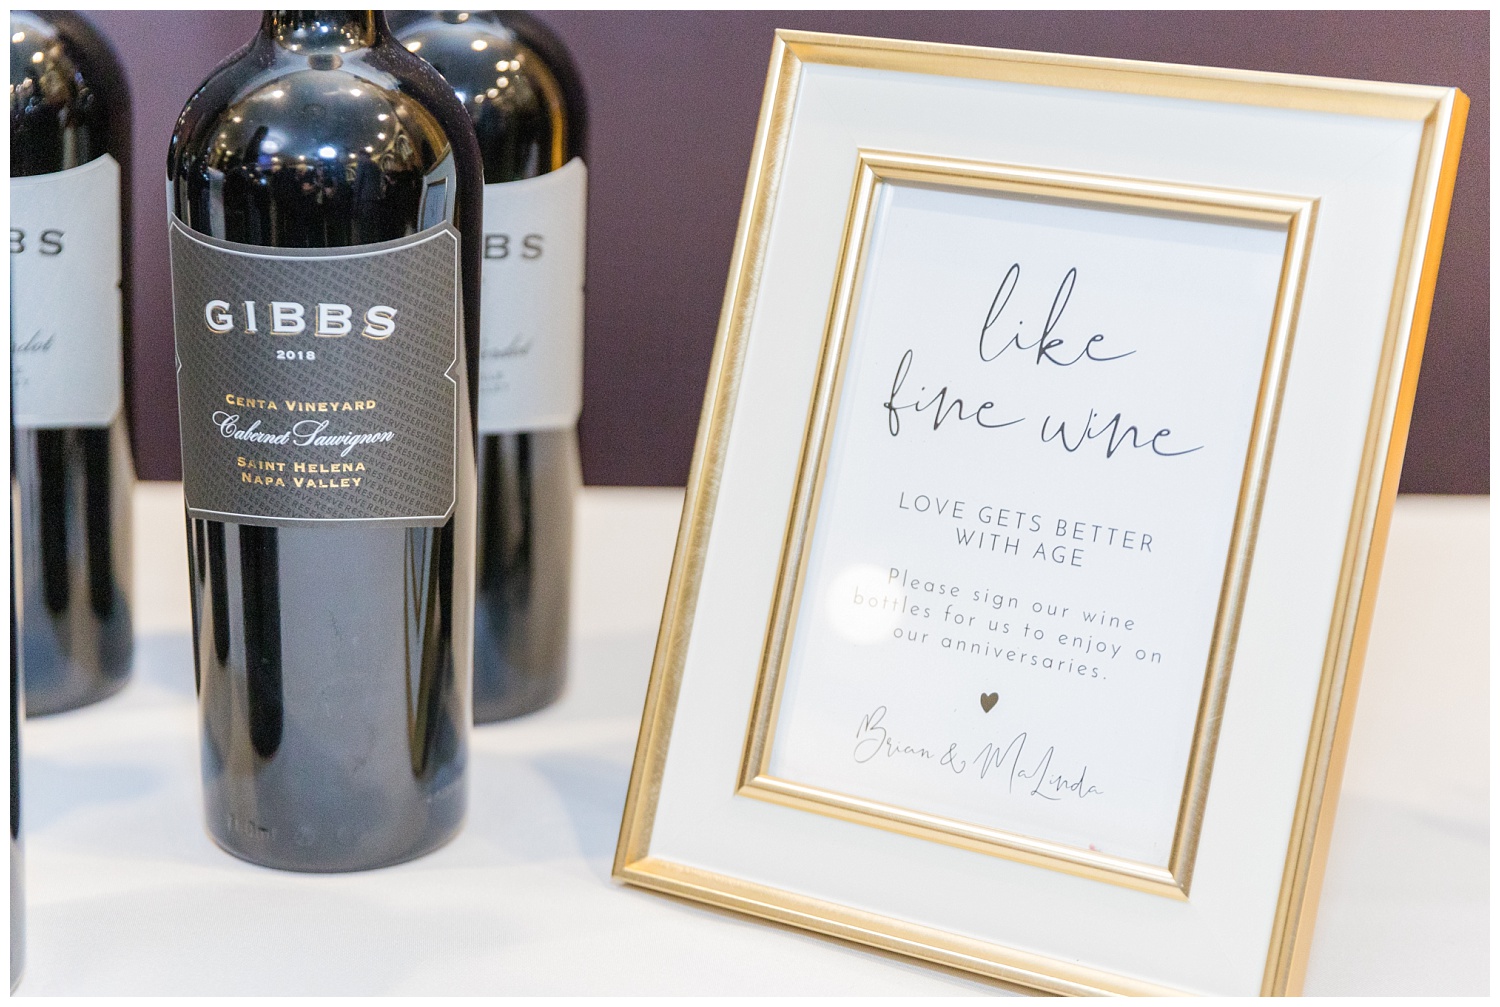 bottles of Gibbs wine next to a framed sign at winter wedding reception